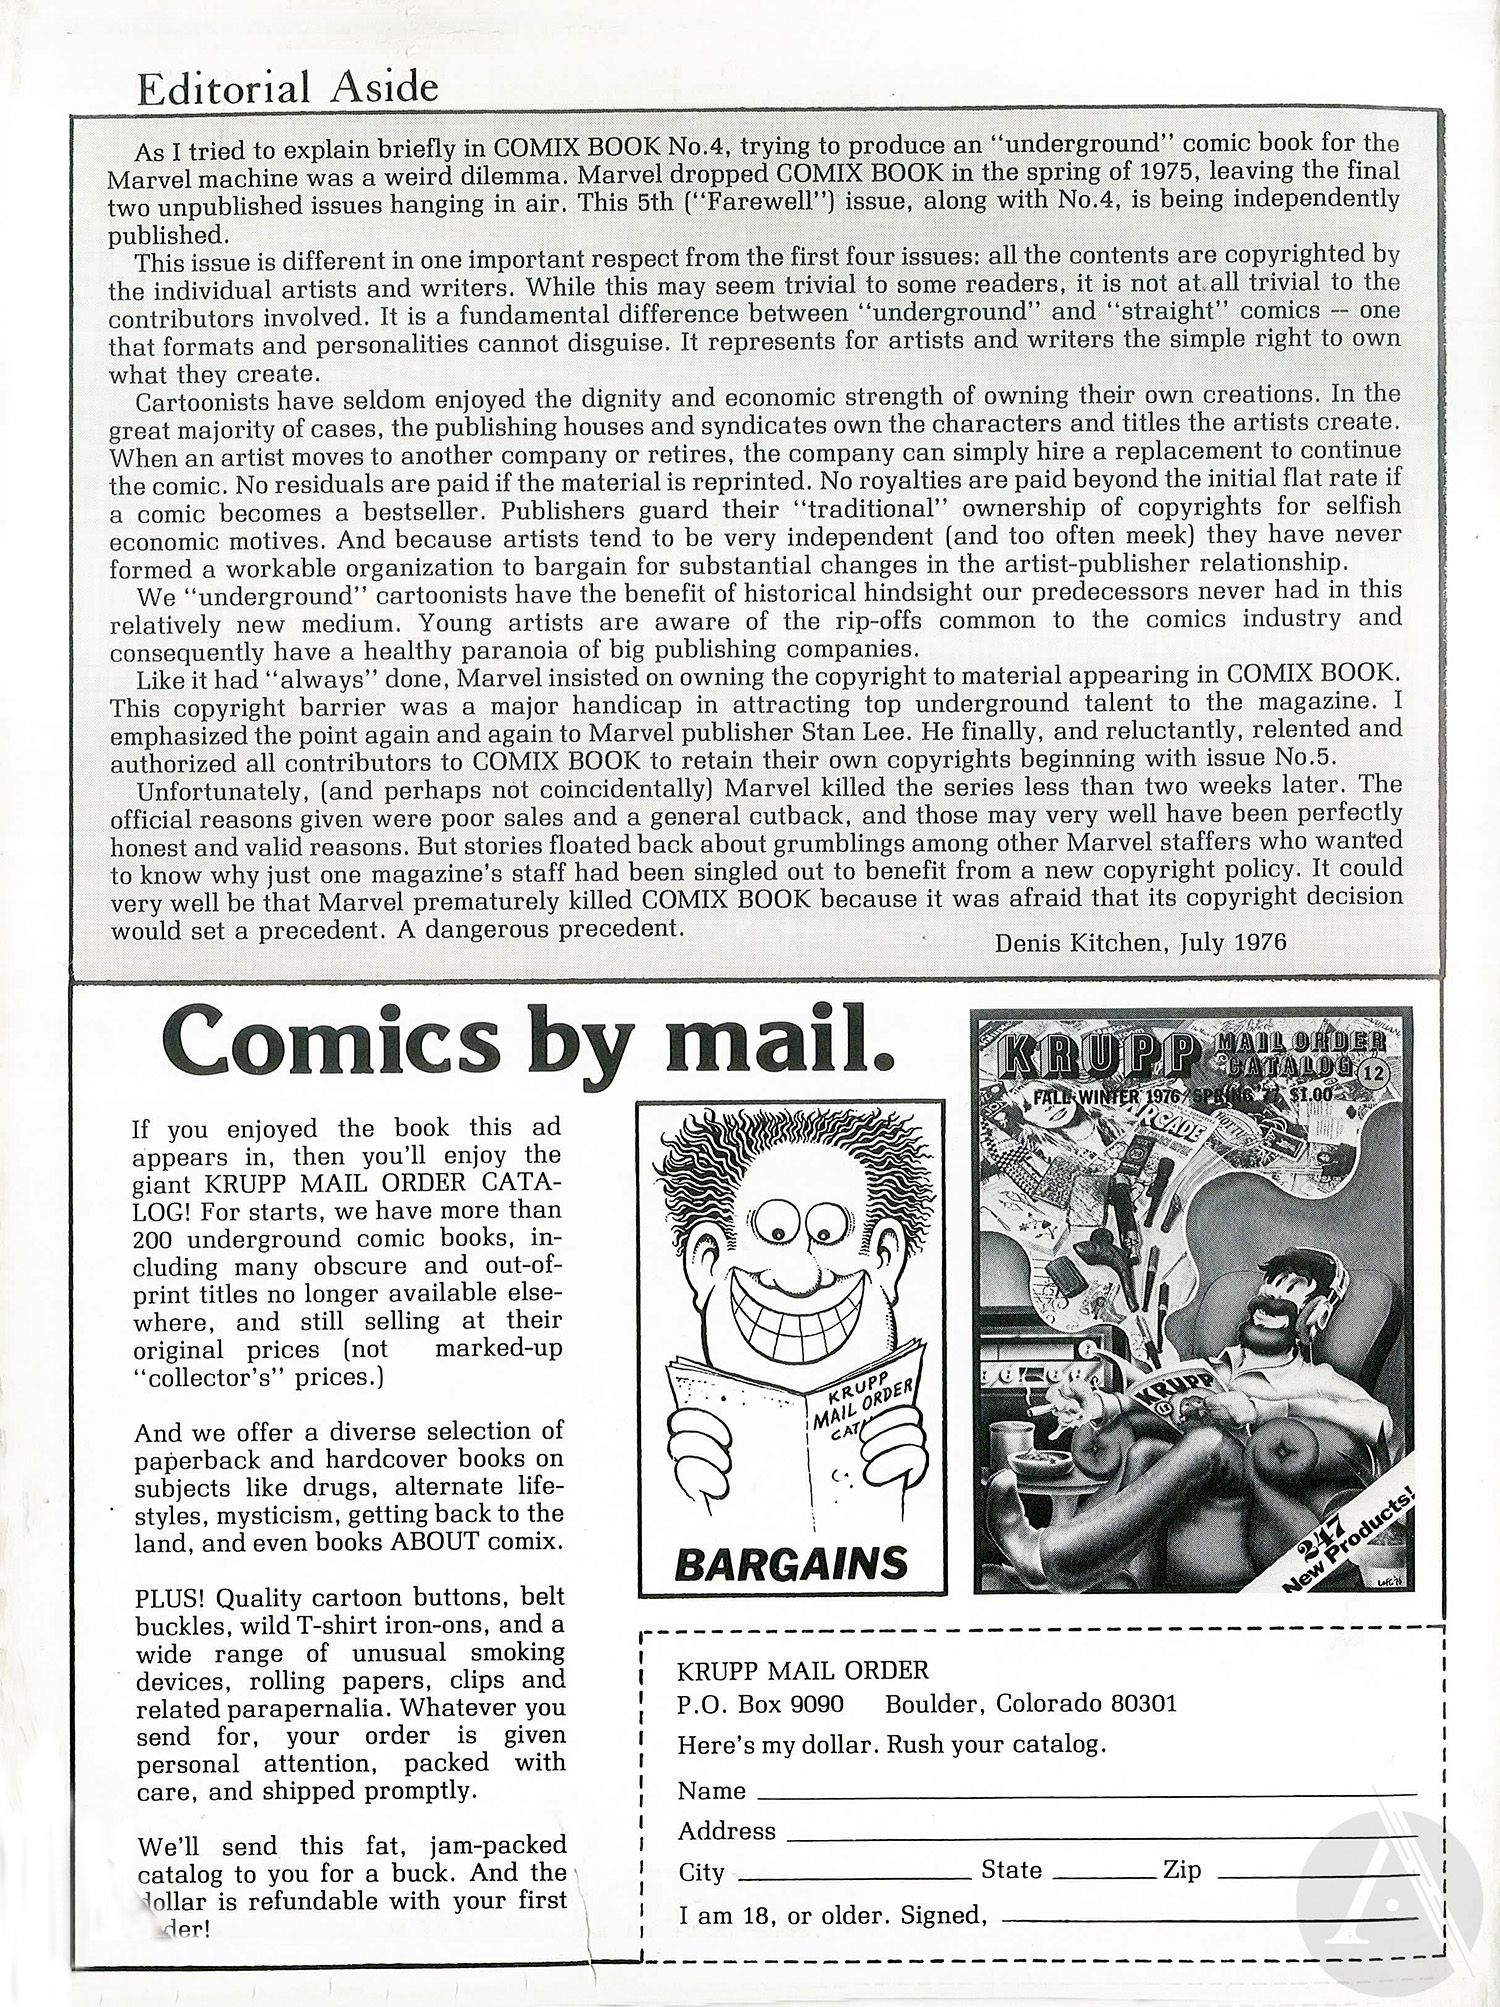 Read online Comix Book comic -  Issue #5 - 2